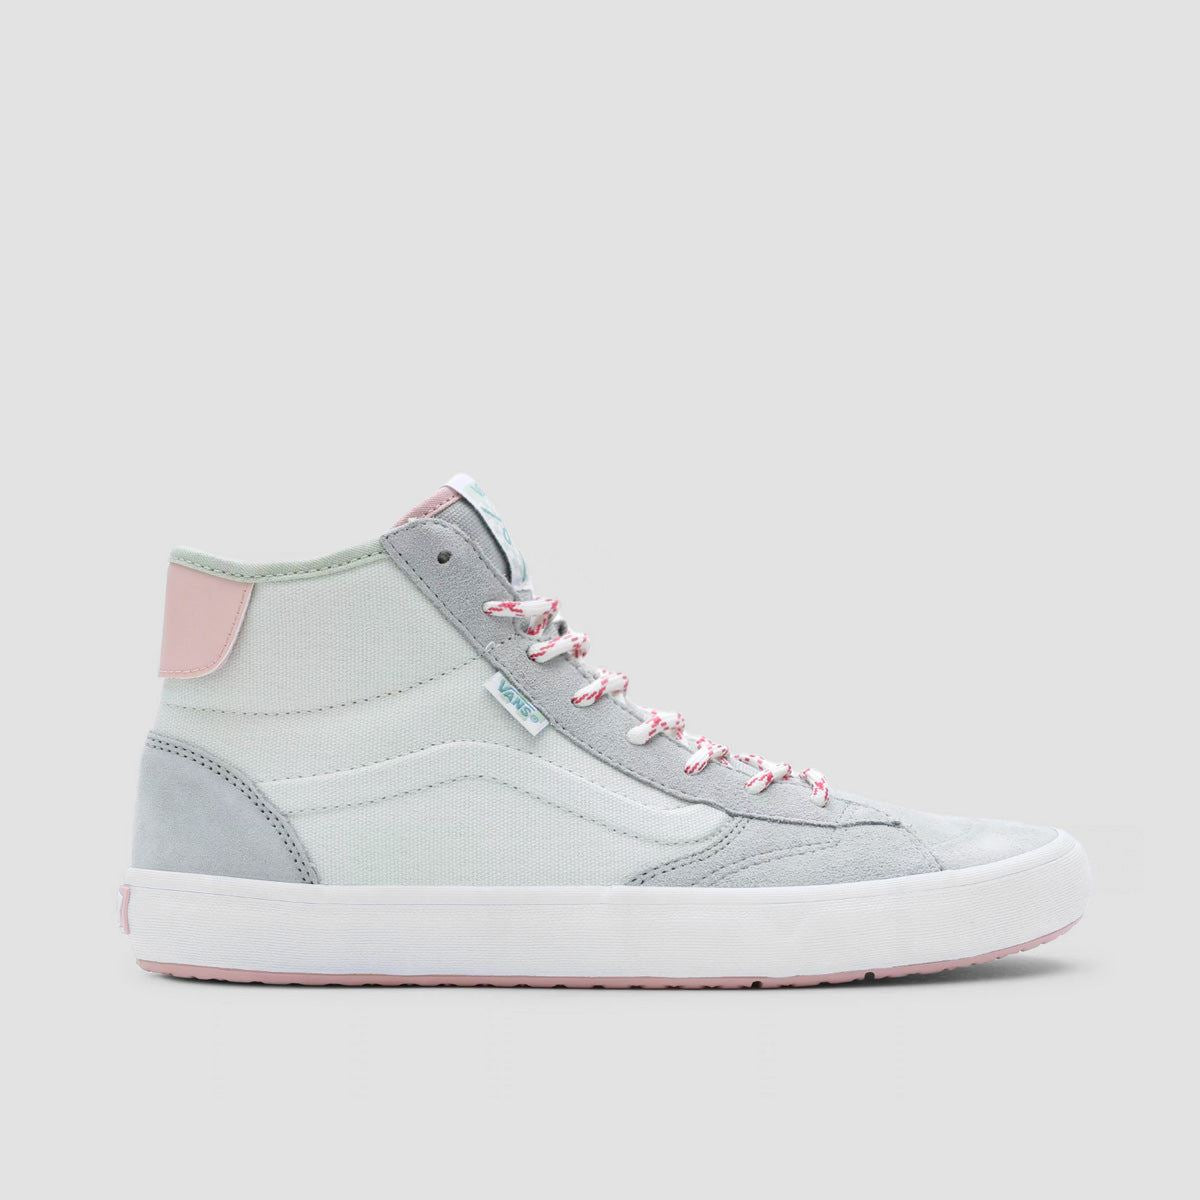 Vans The Lizzie High Top Shoes - Light Grey/Multi